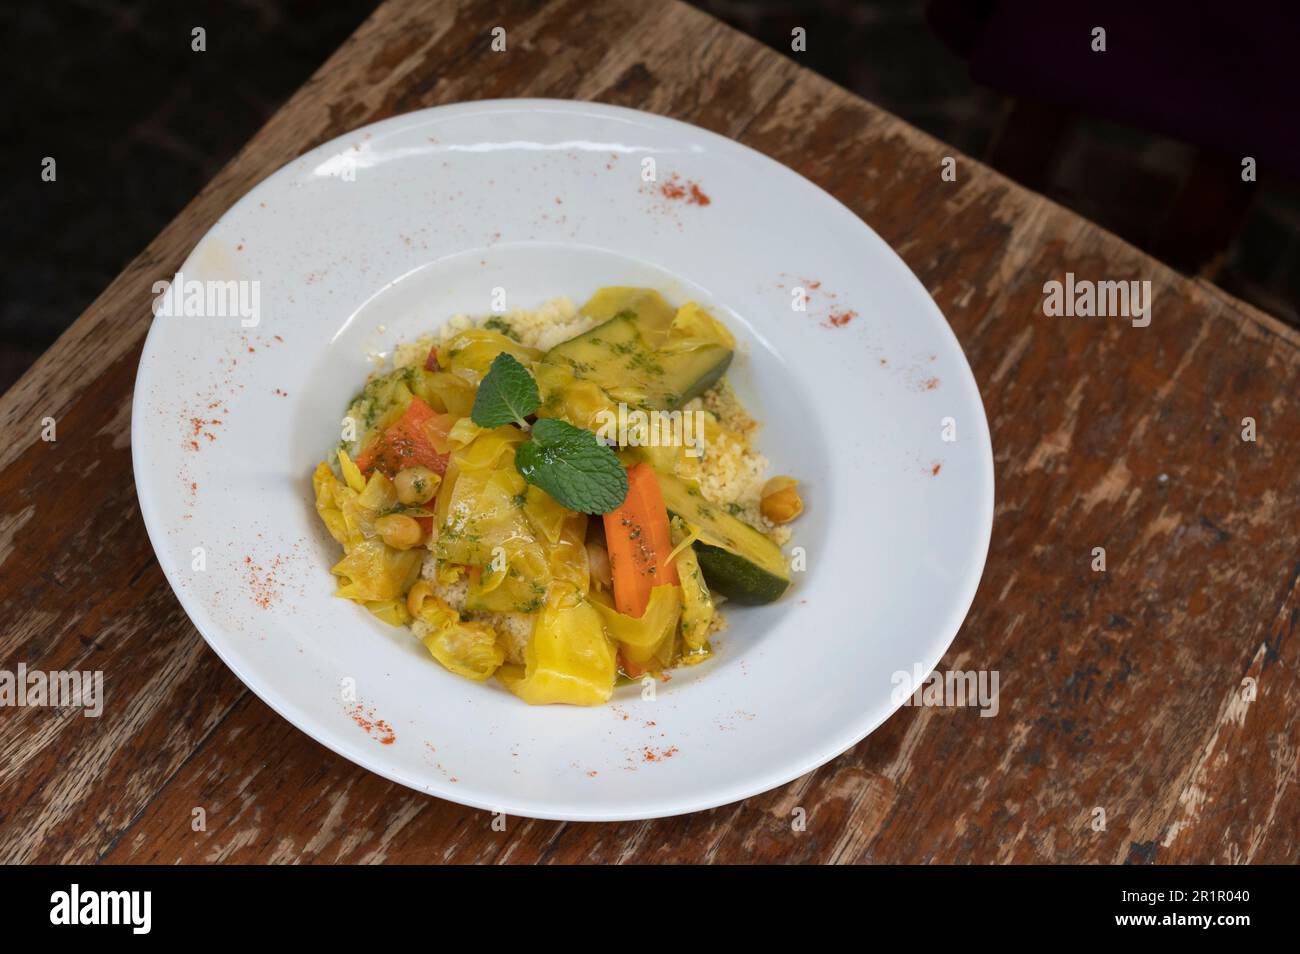 Italy, Trentino-Alto Adige, Alto Adige - South Tyrol, Bolzano, vegan cuisine with animal product free ingredients, organic restaurant 'Humus' by Mohammend Madu Hussien, Cous Cous veggie Stock Photo